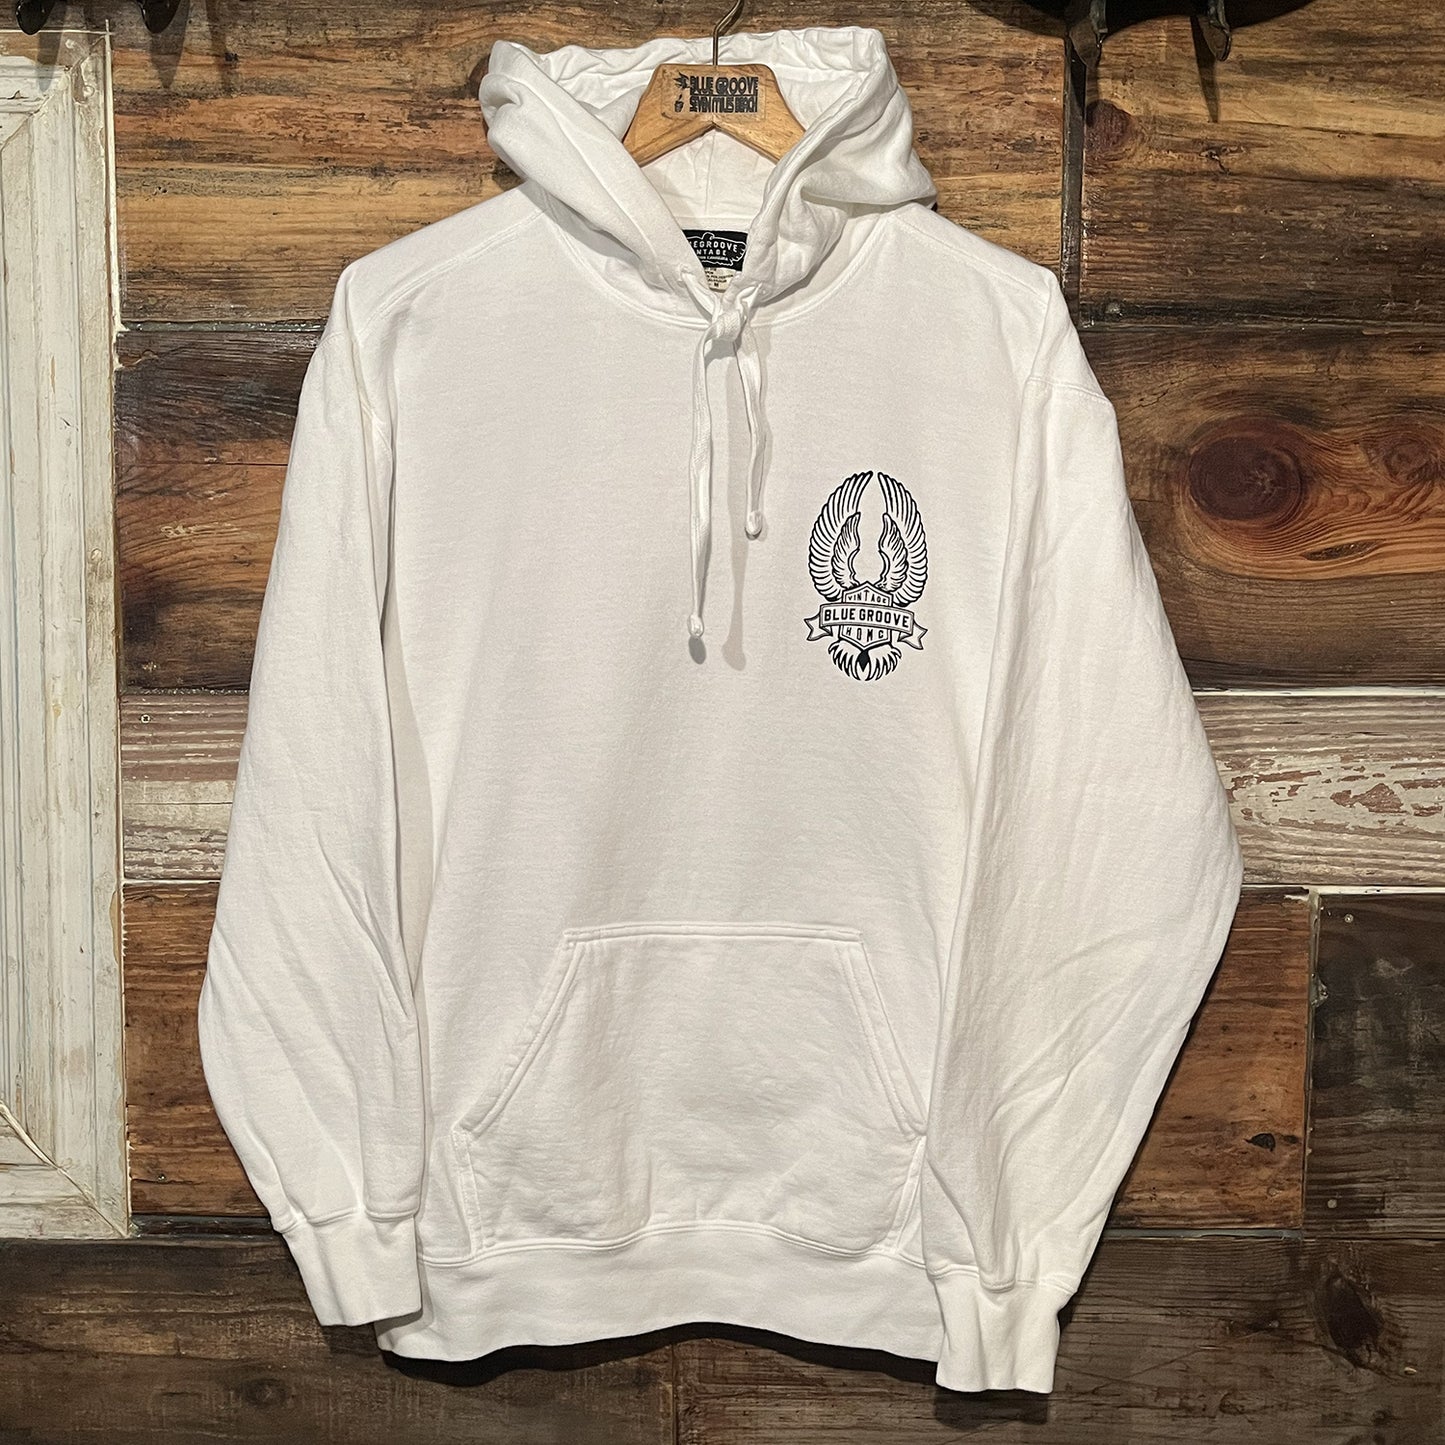 “BRING ‘EM BACK TO LIFE” PULL-OVER HOODIE - WHITE